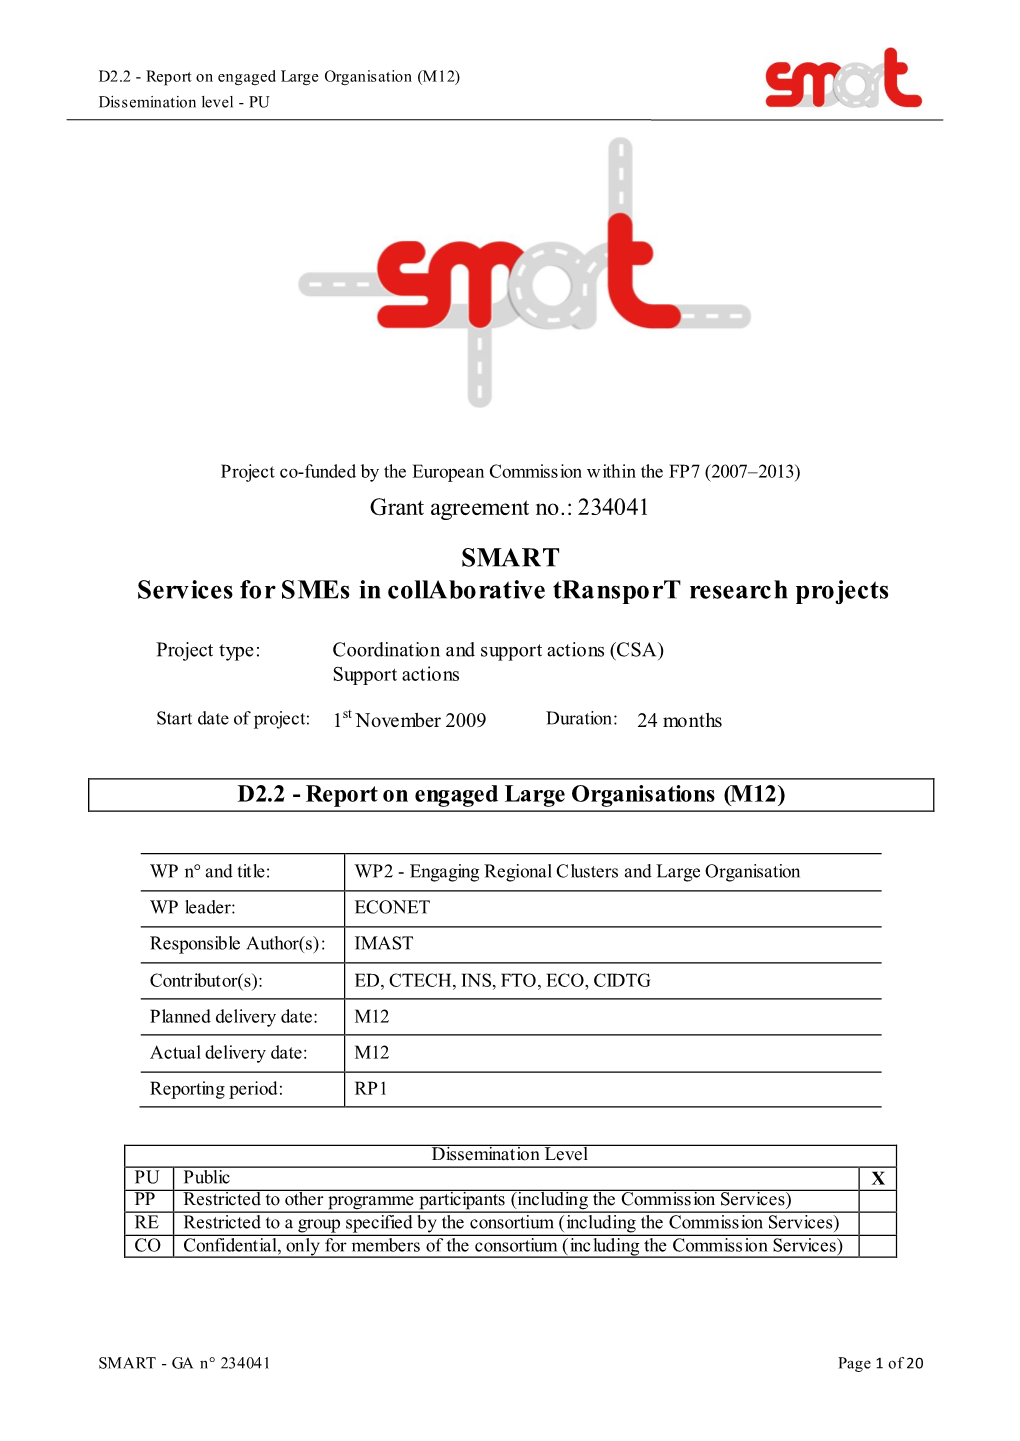 SMART Services for Smes in Collaborative Transport Research Projects